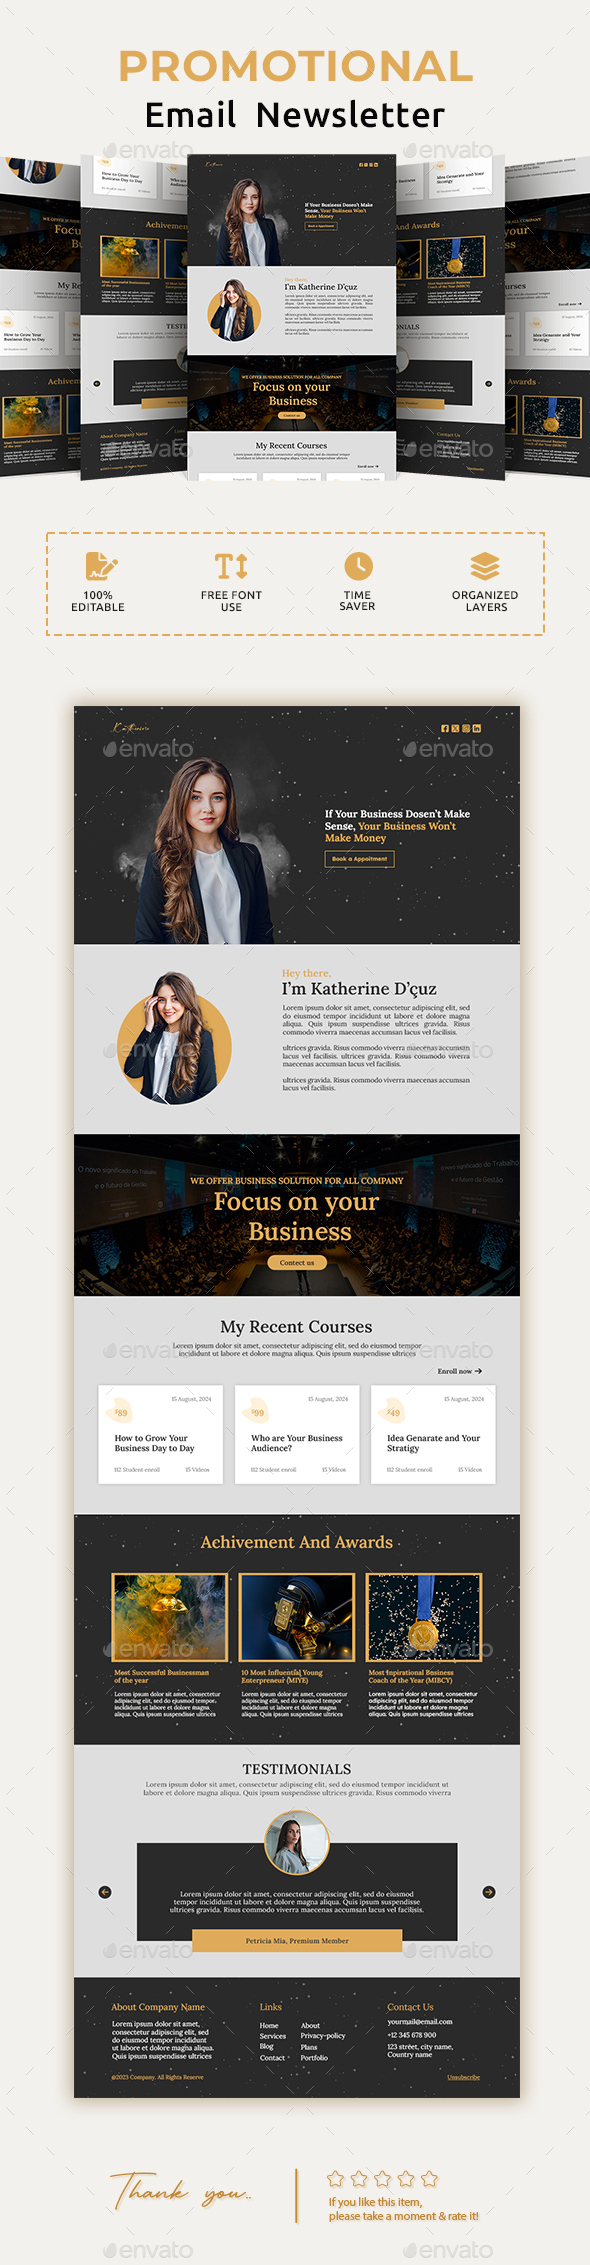 Influencer Email Newsletter PSD Template